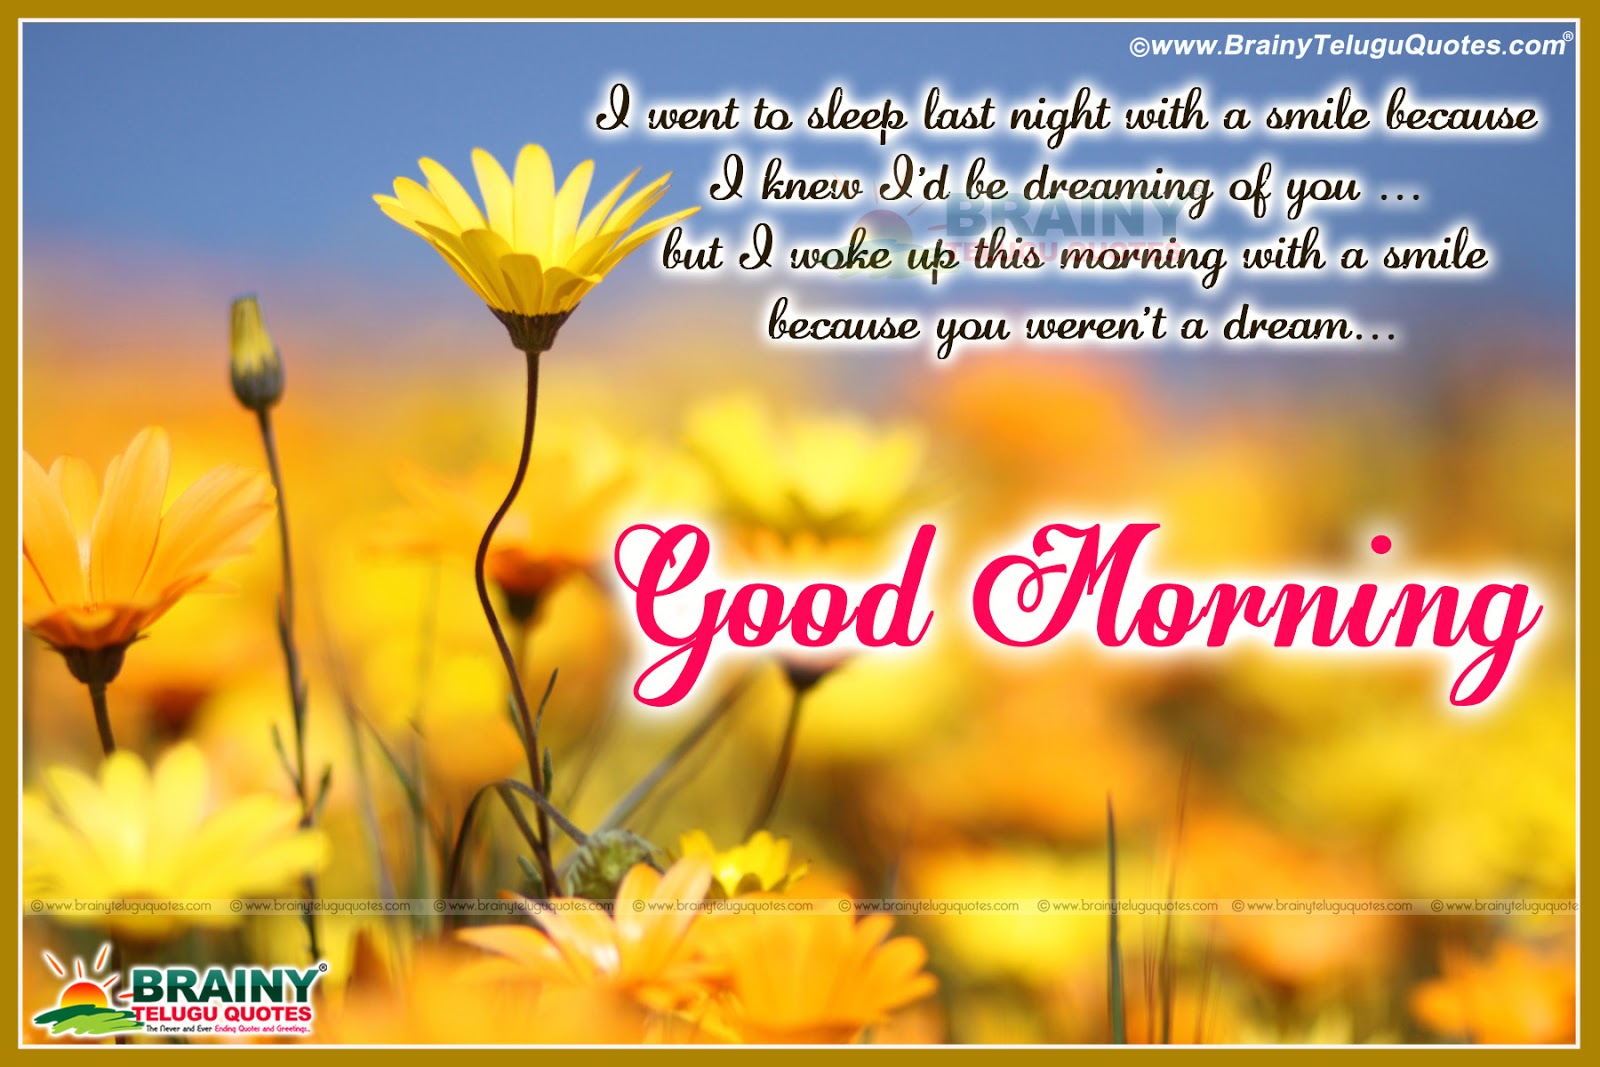 Good Morning English Wishes with Messages Wallpapers ...